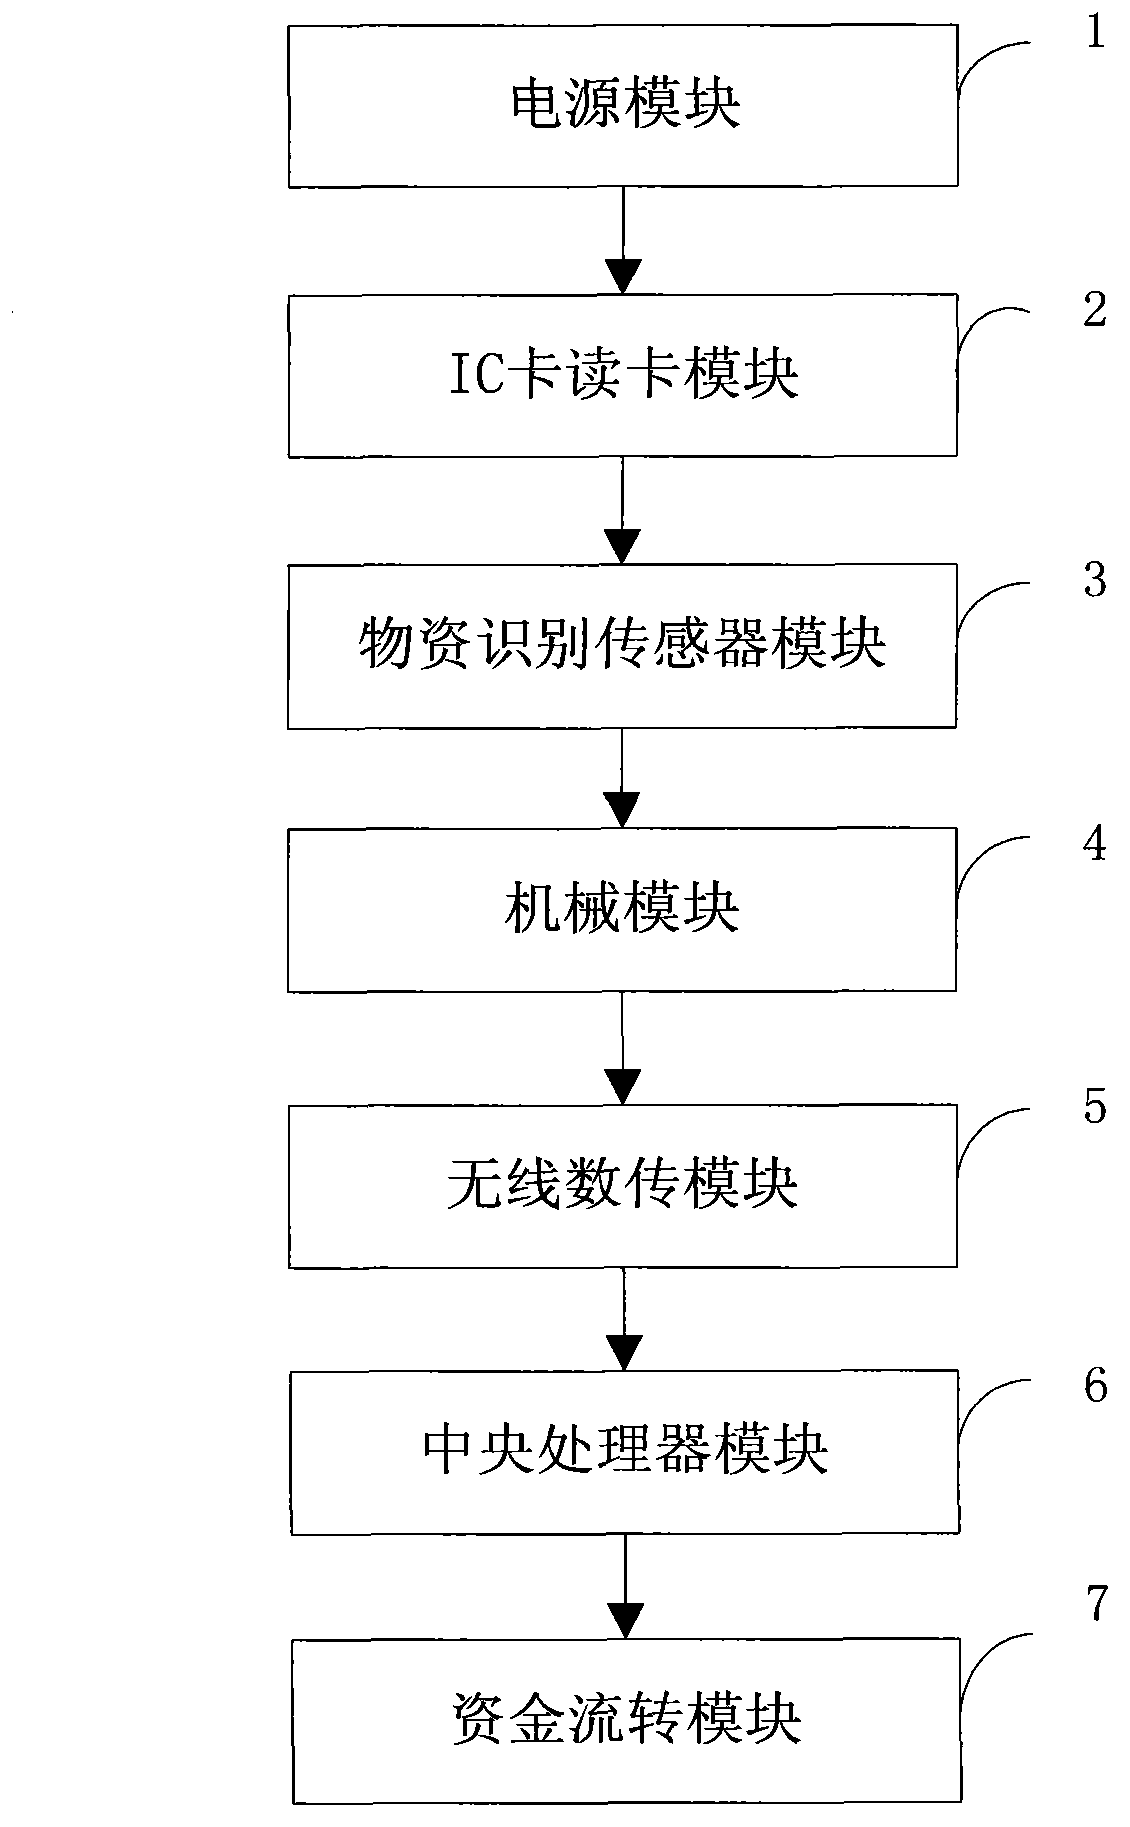 Material recycling device based on Ad Hoc network